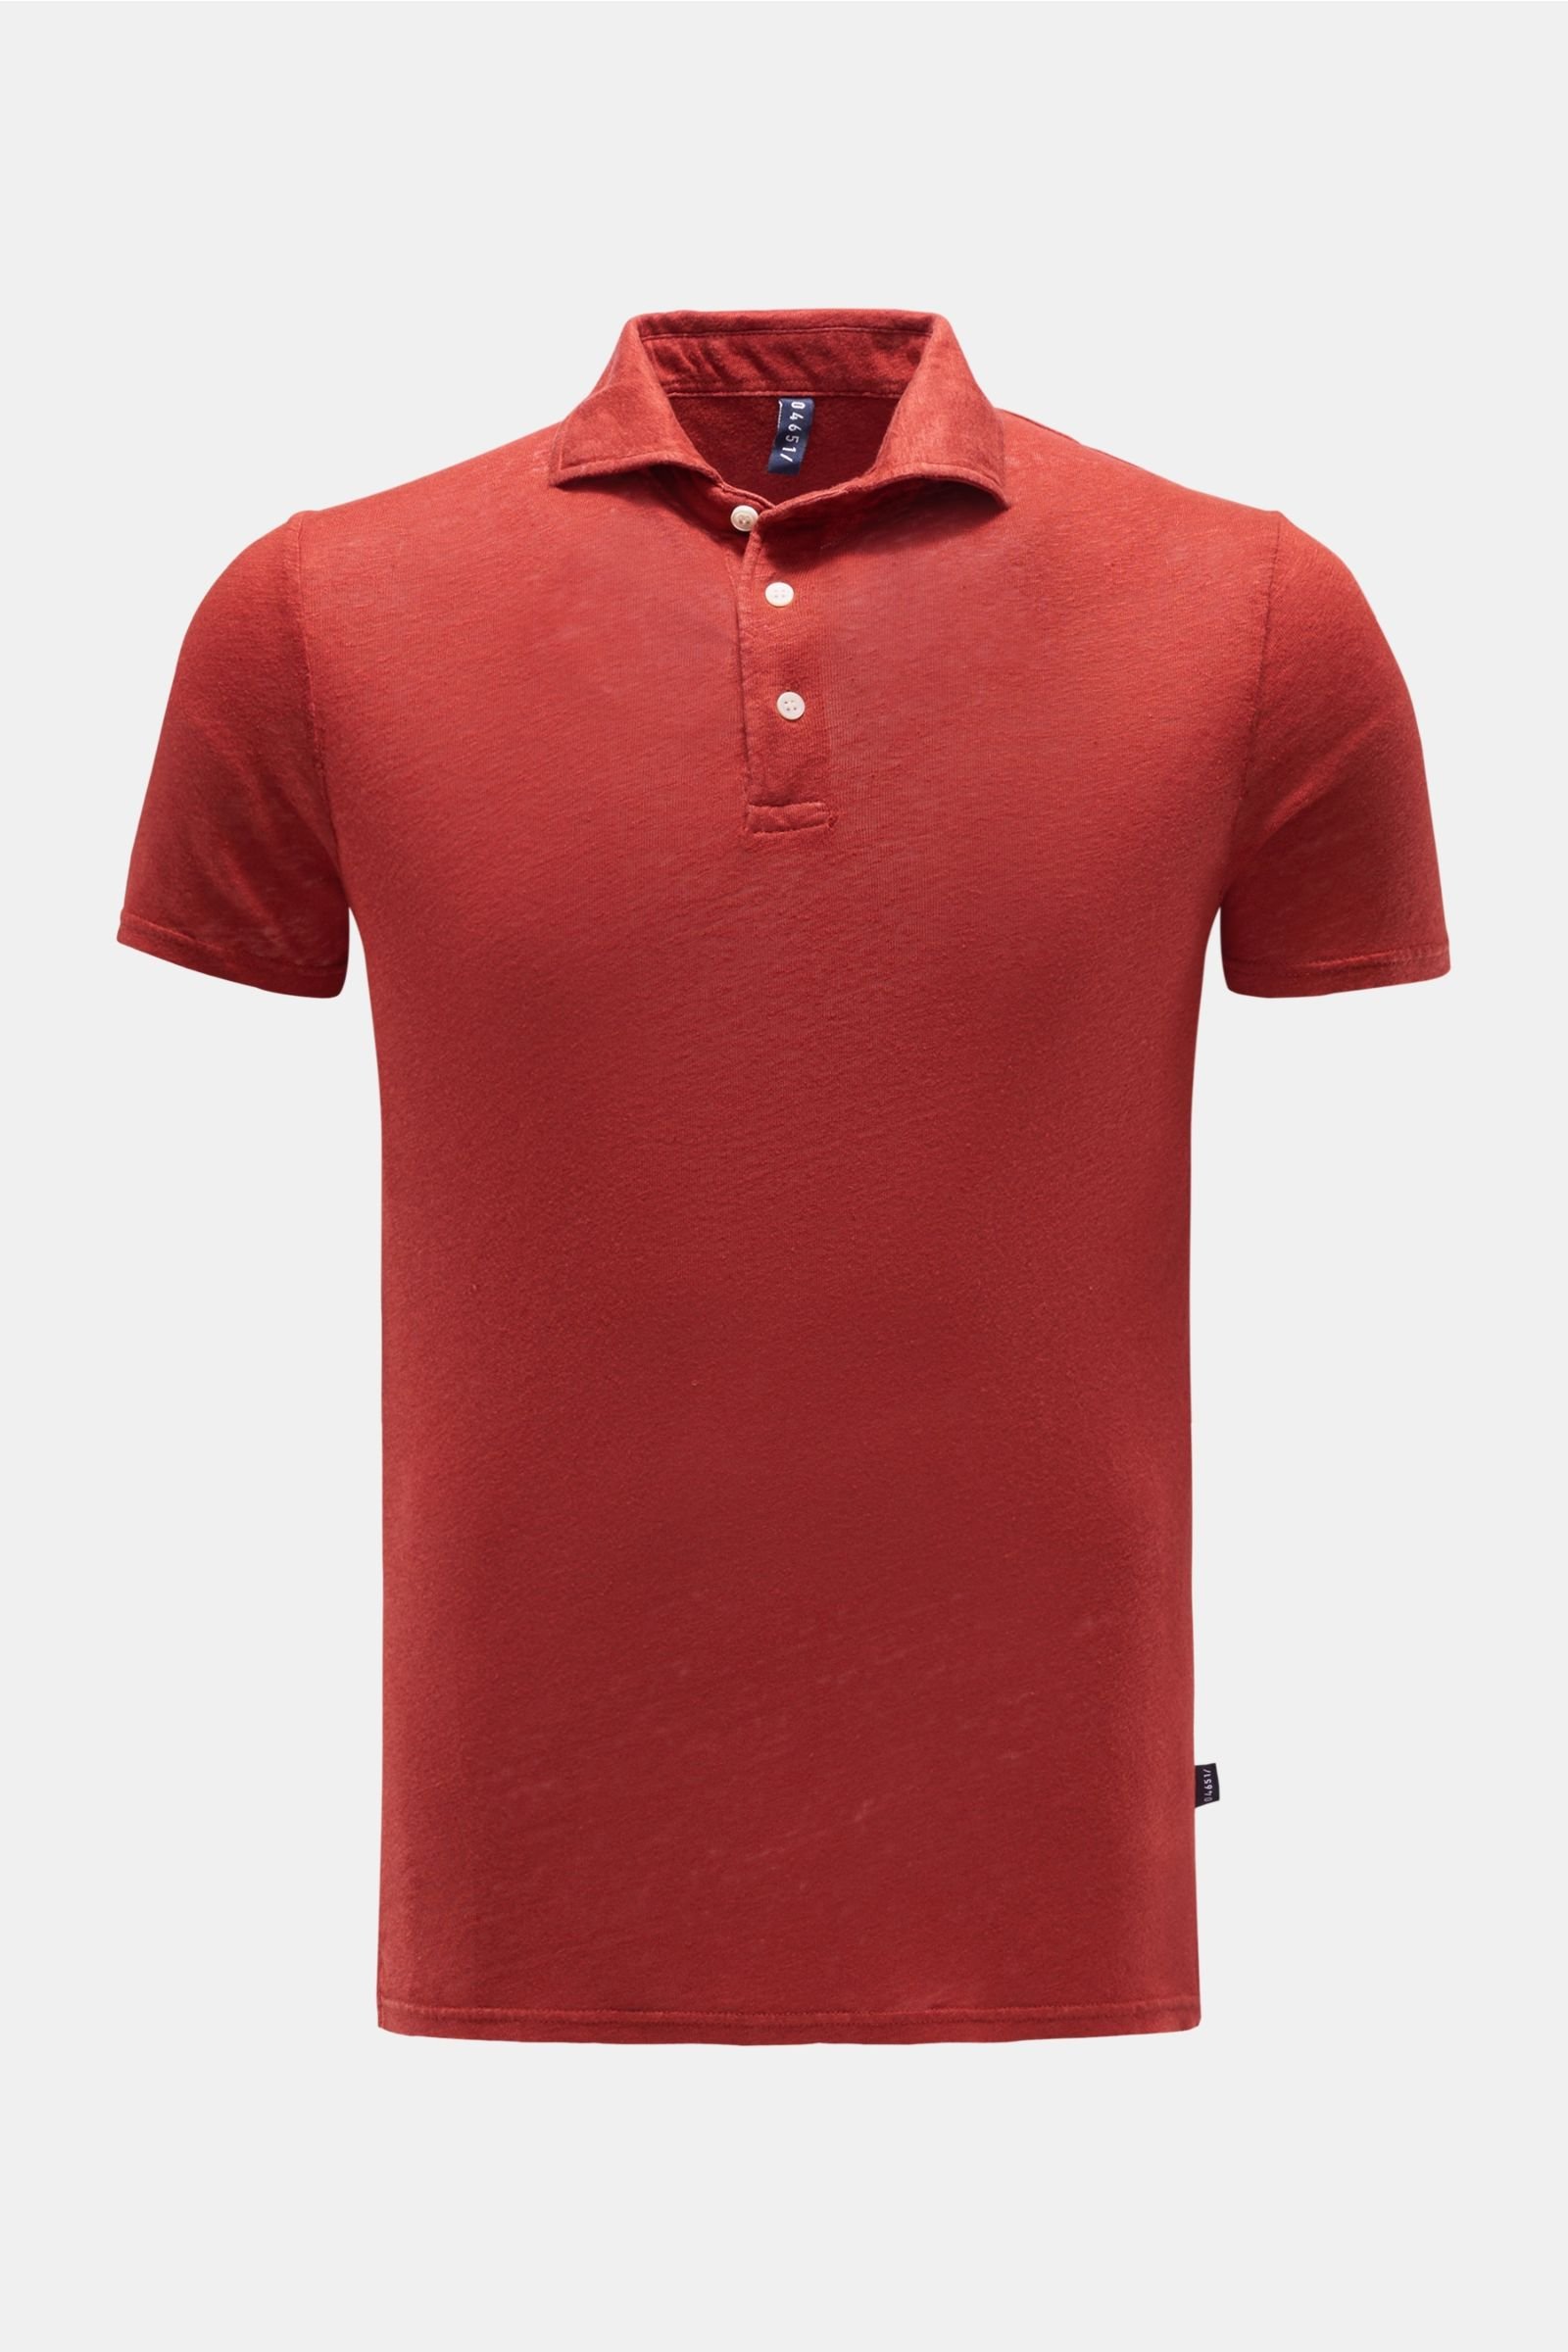 Linen-polo shirt bright red